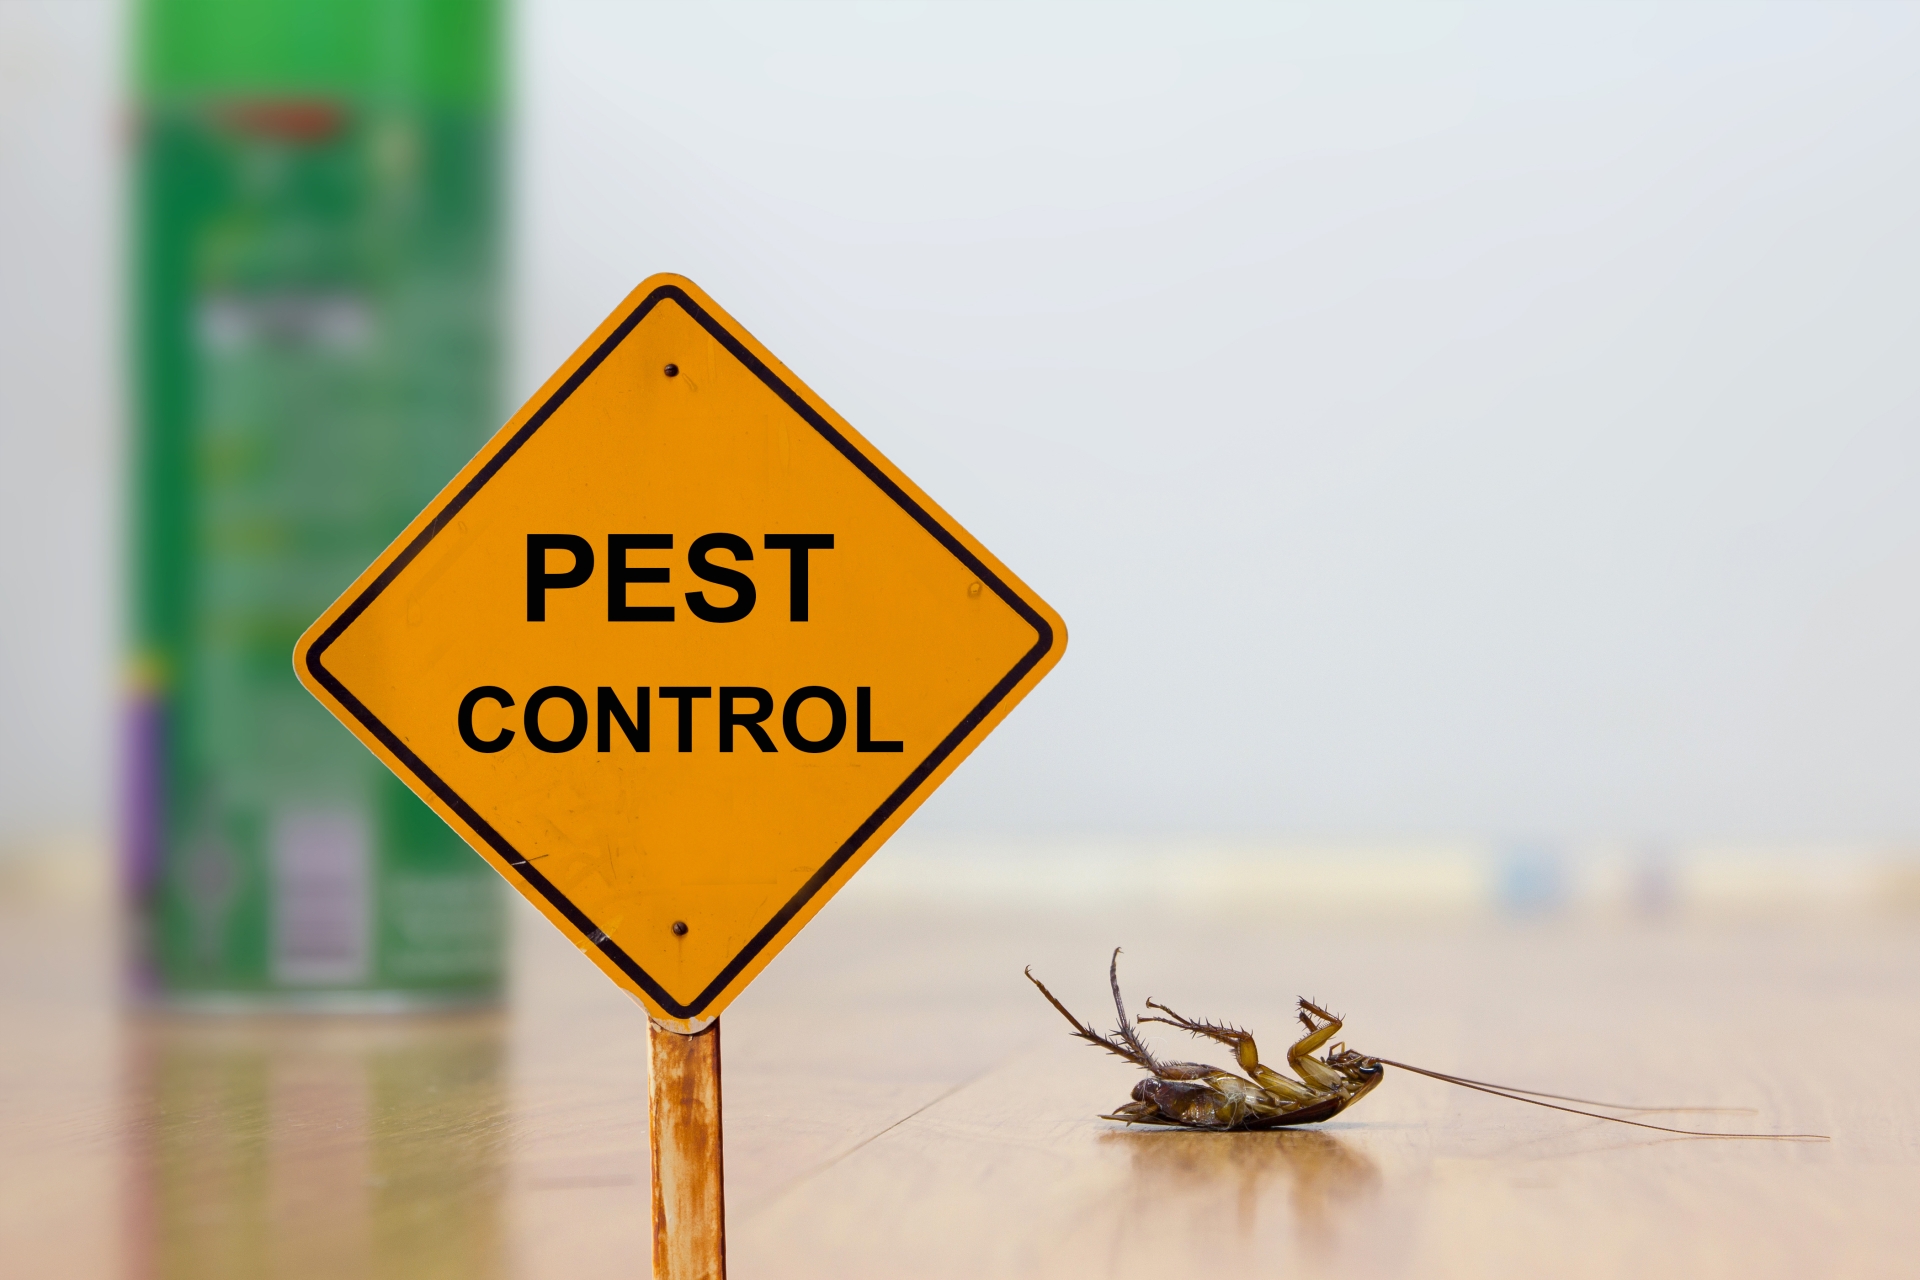 24 Hour Pest Control, Pest Control in Holloway, N7 . Call Now 020 8166 9746